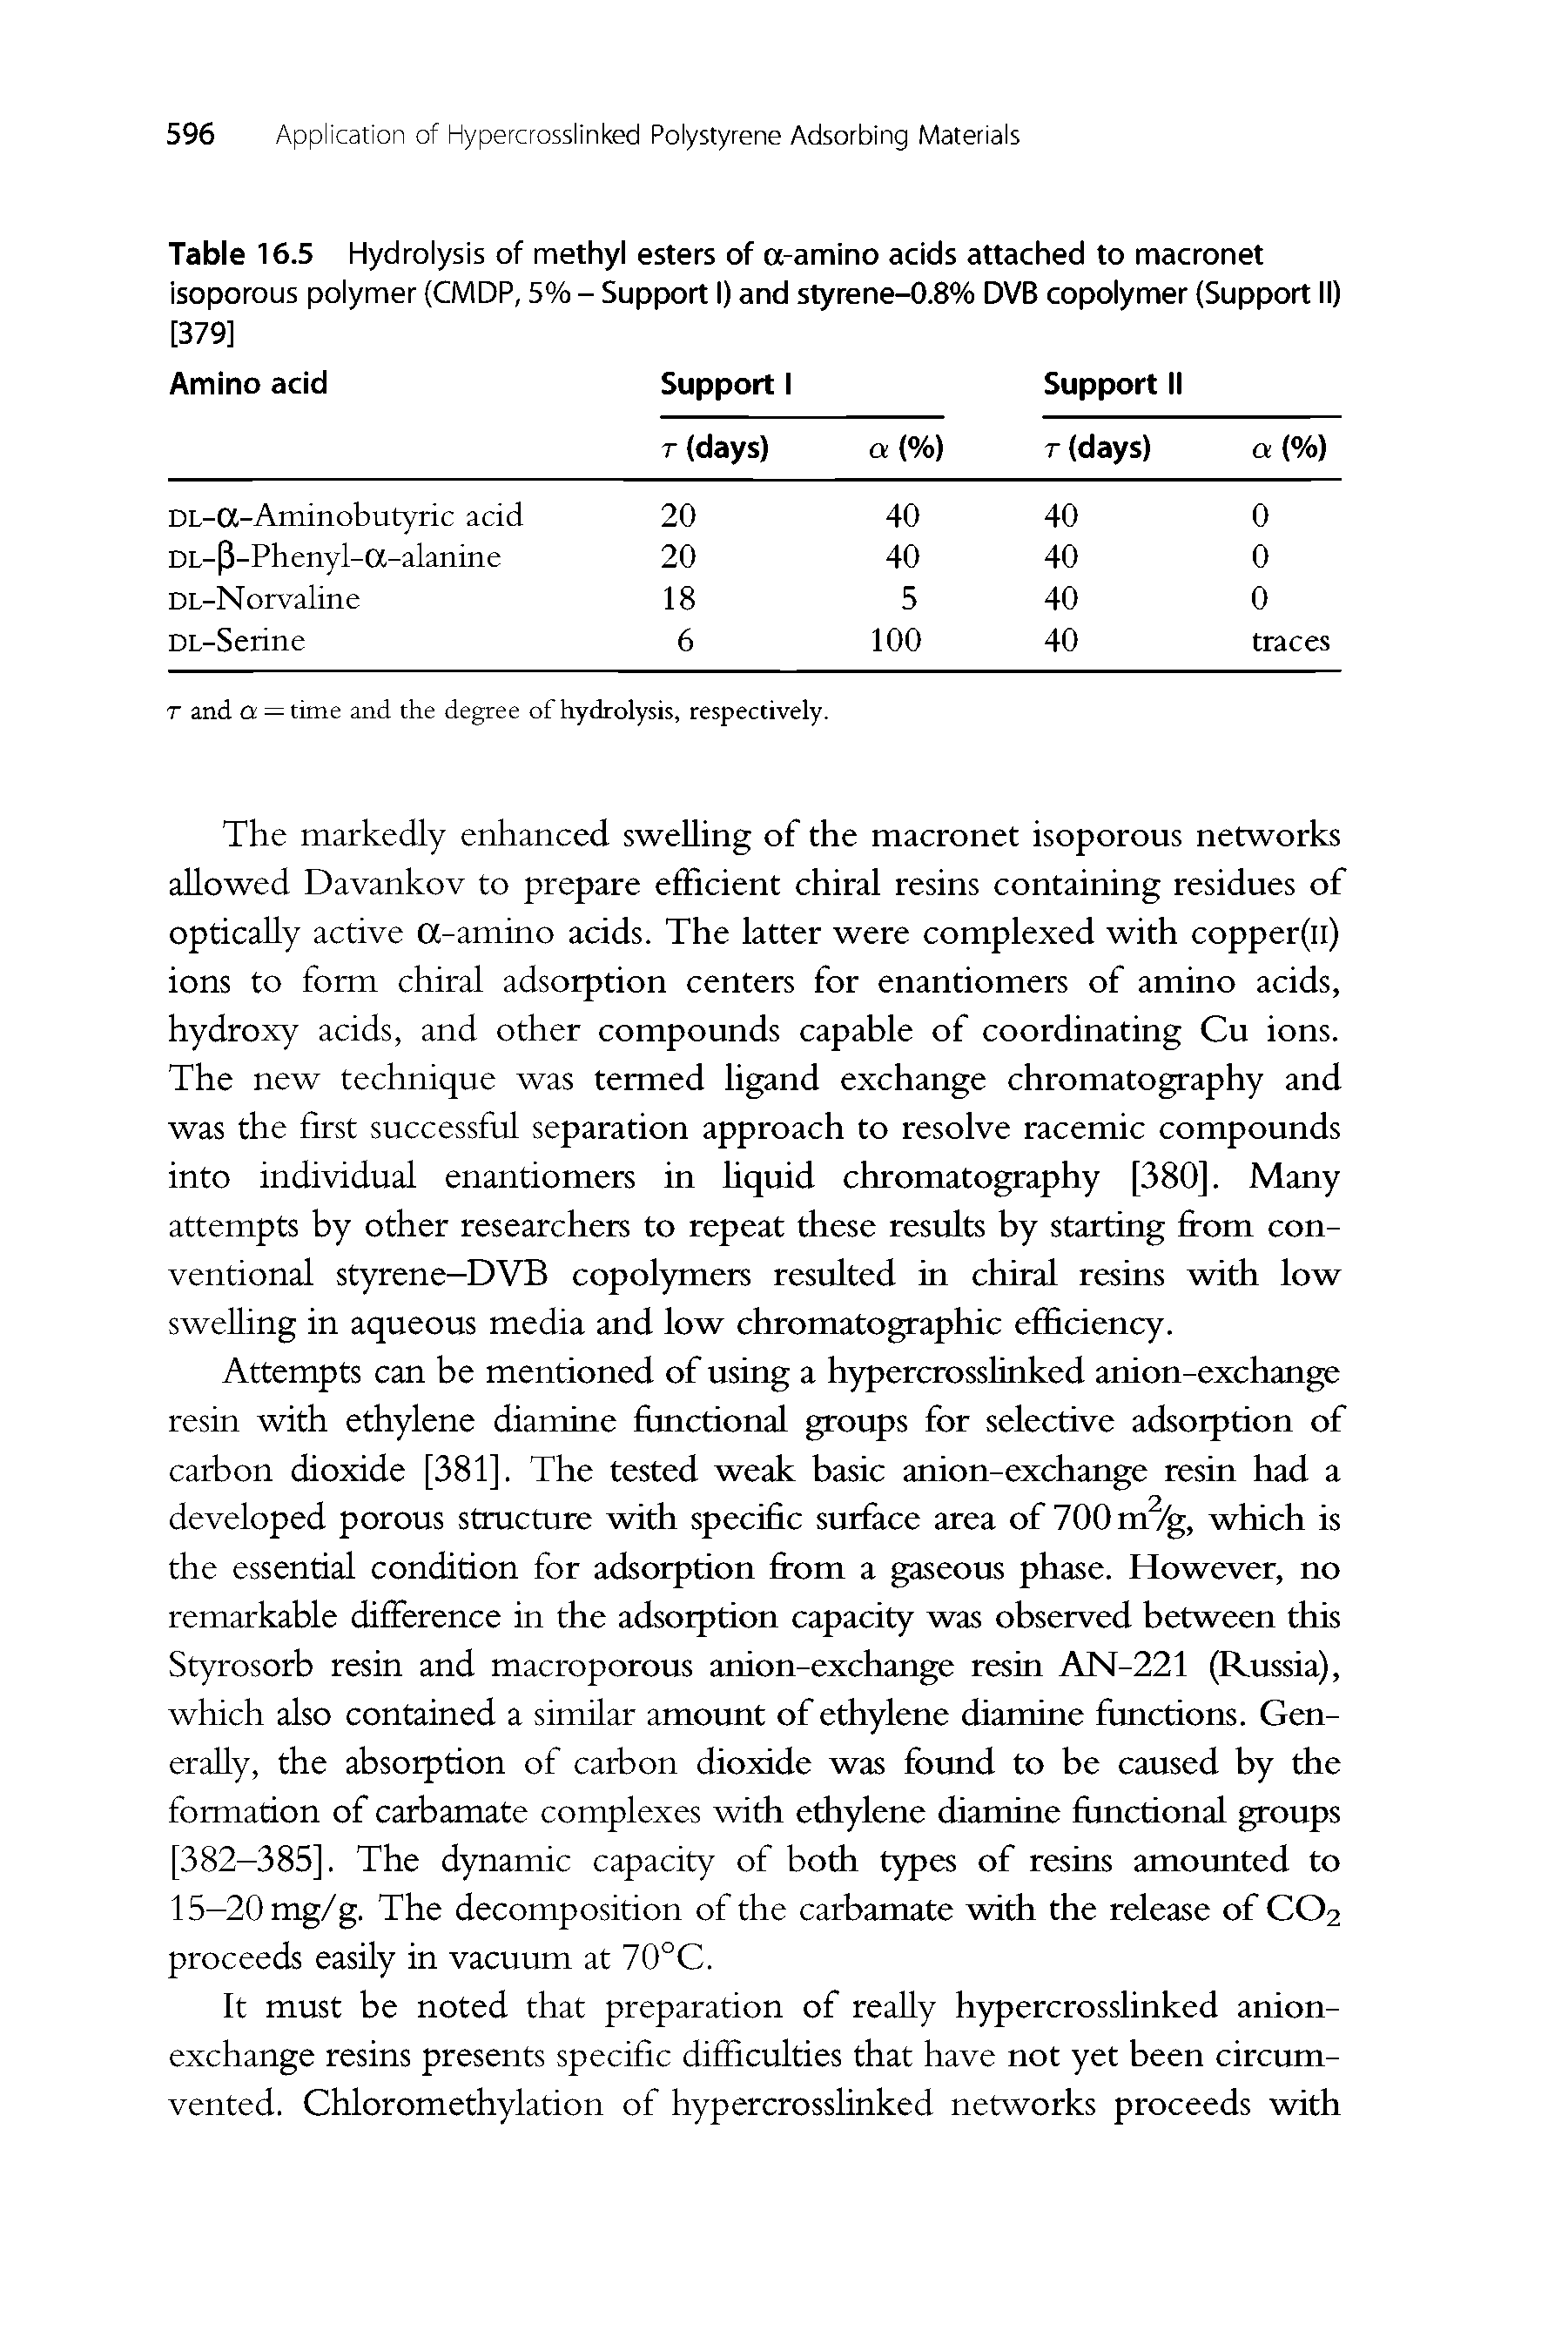 Table 16.5 Hydrolysis of methyl esters of a-amino acids attached to macronet isoporous polymer (CMDP, 5% - Support I) and styrene-0.8% DVB copolymer (Support II) [379]...